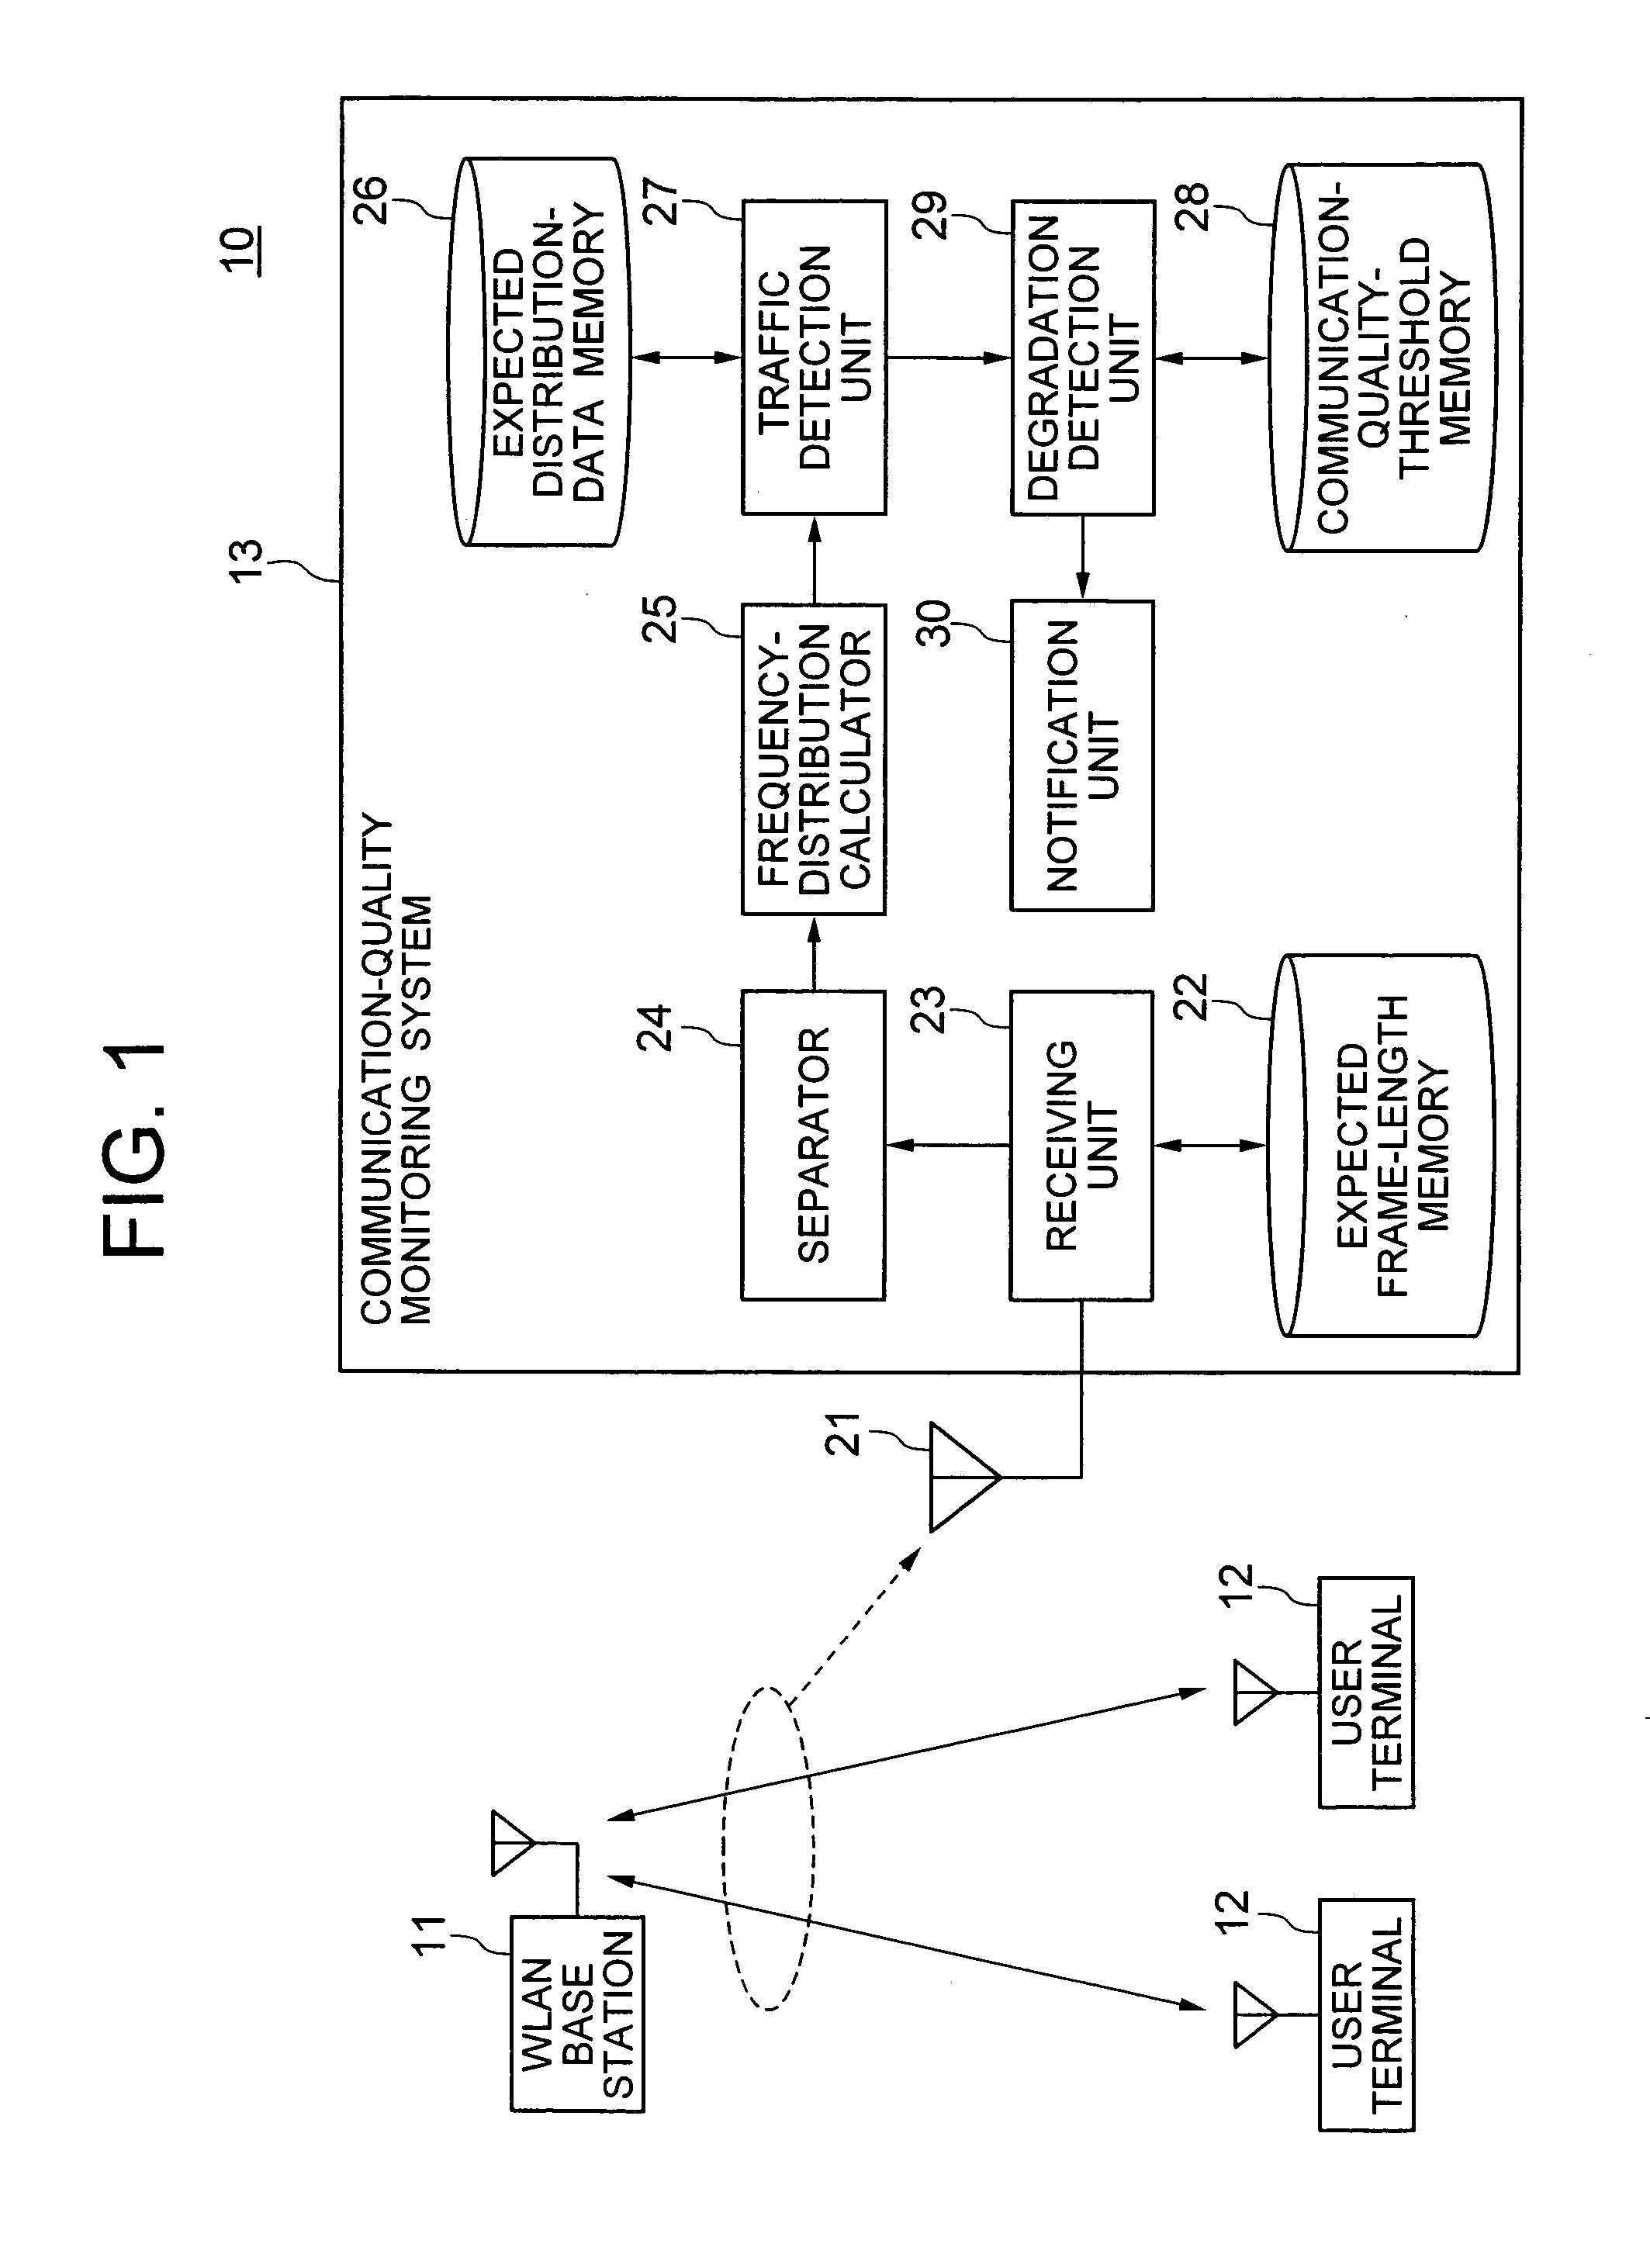 Traffic detection system and communication-quality monitoring system on a network